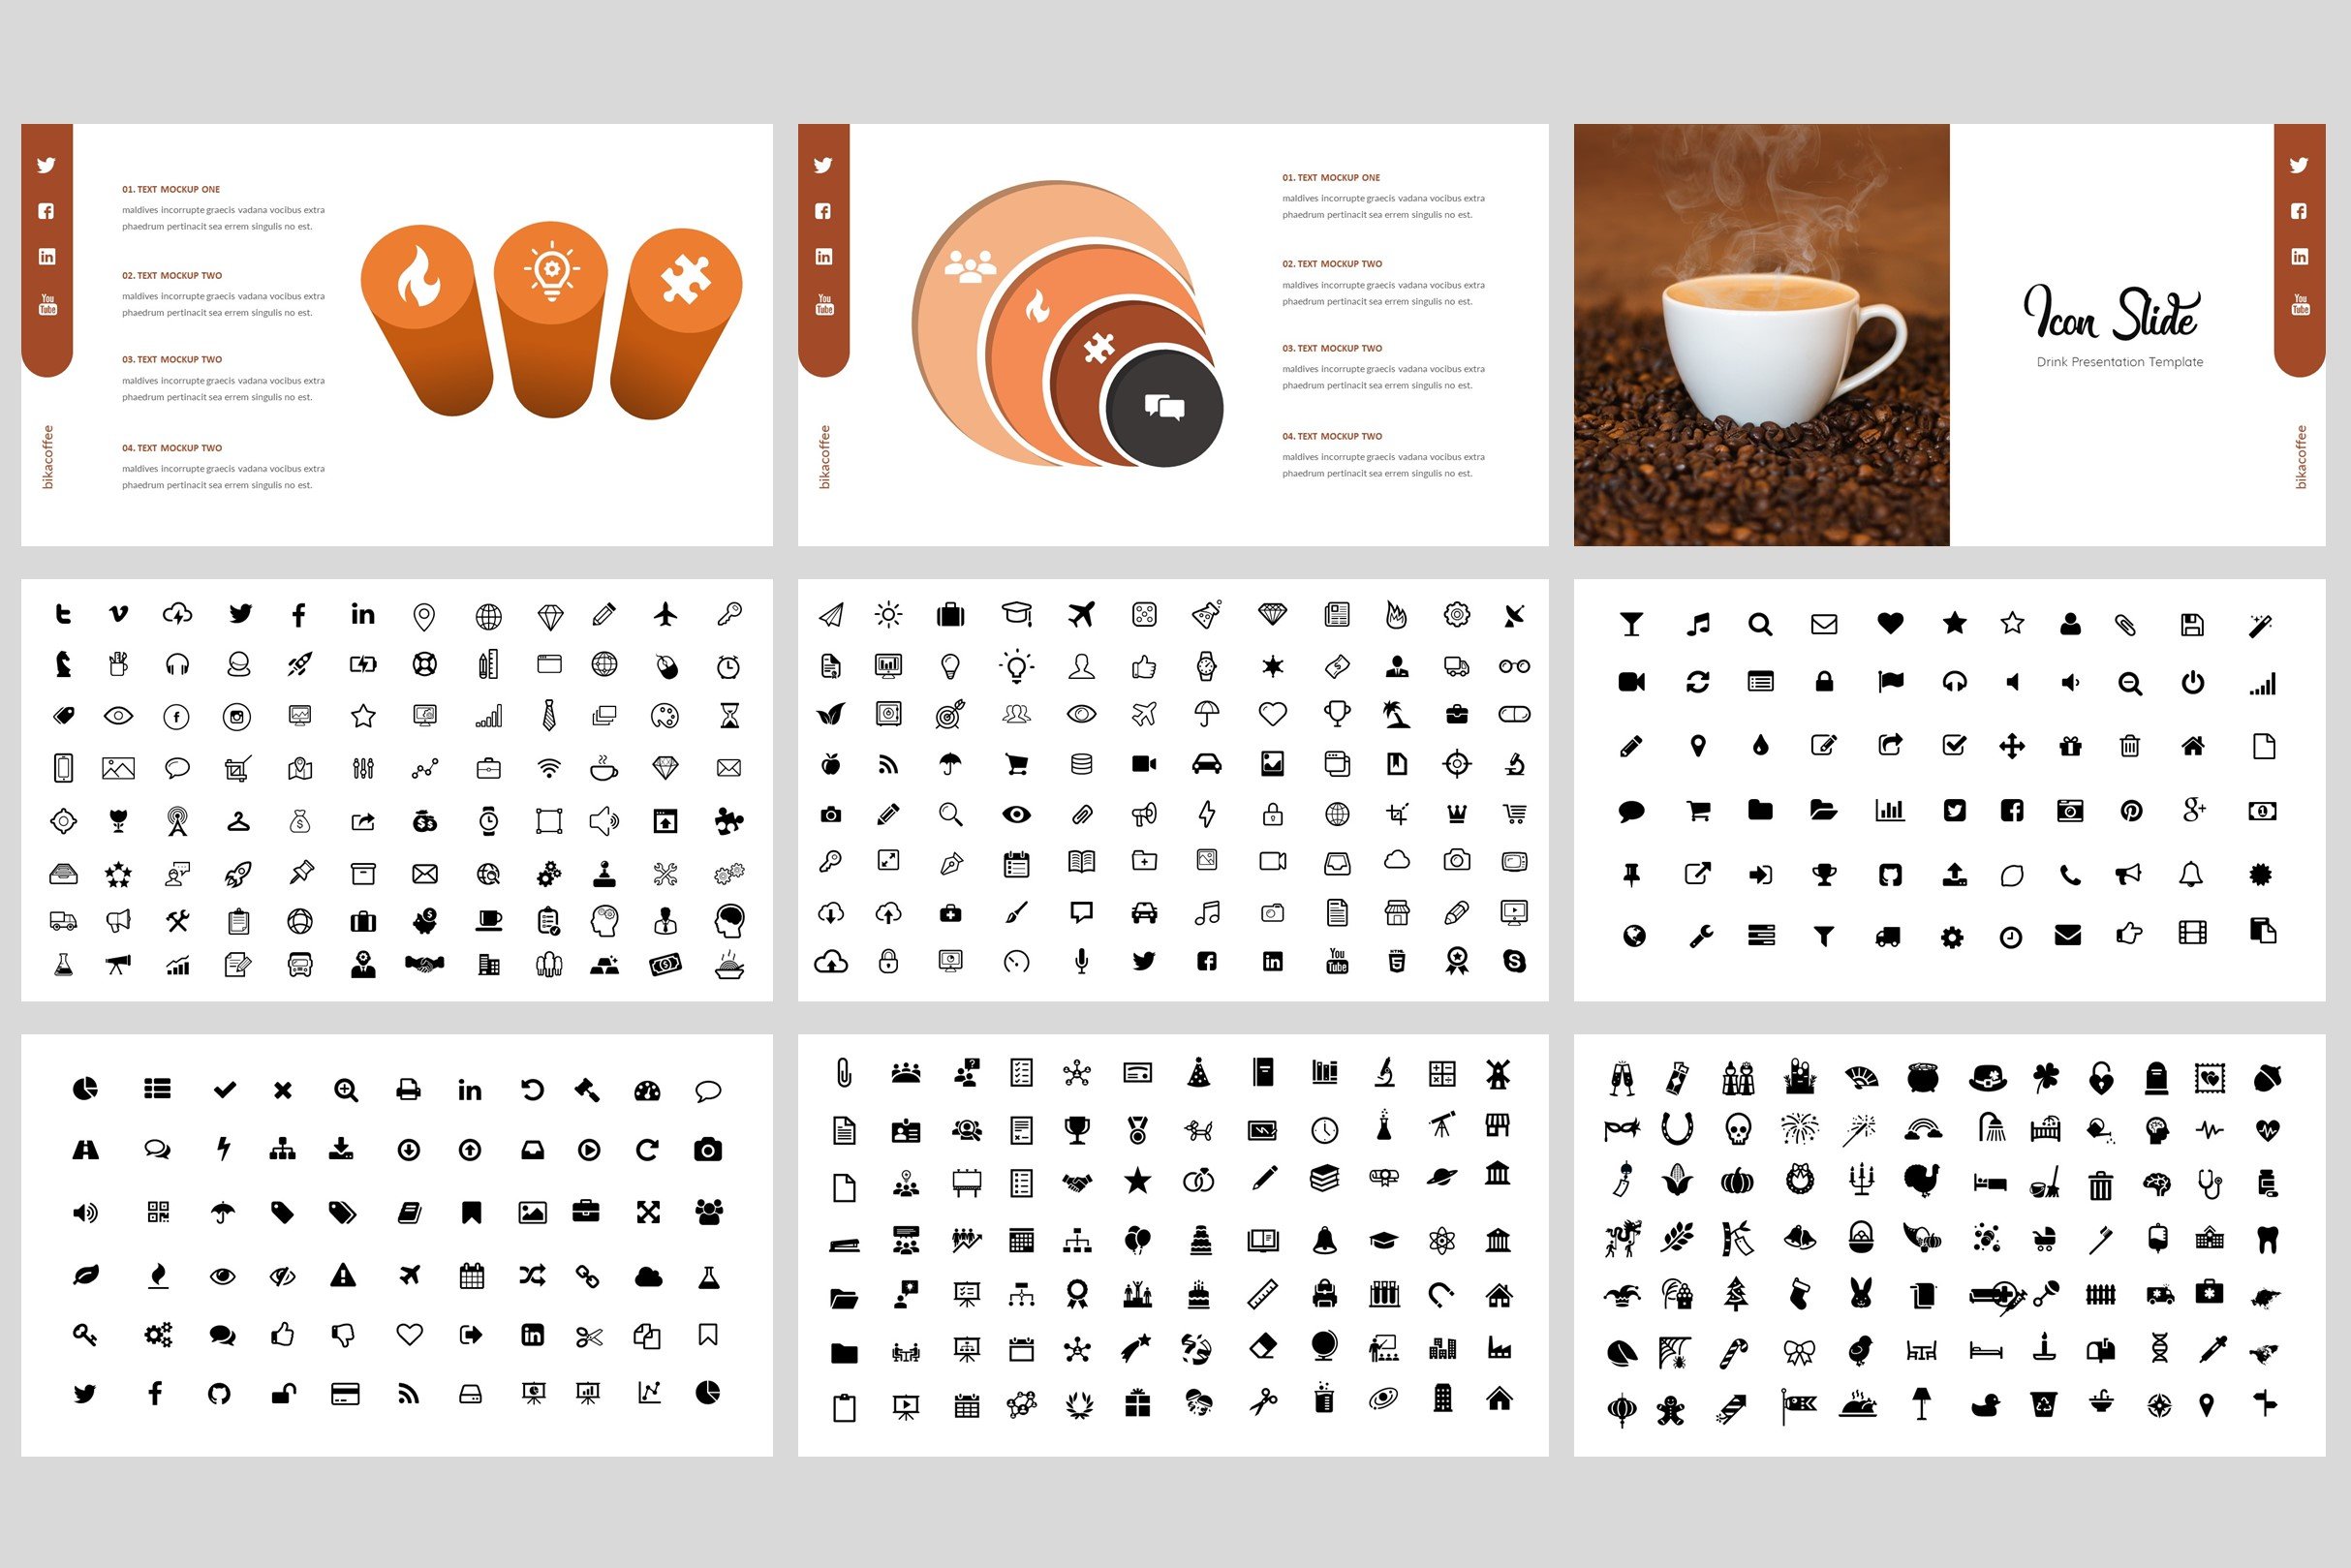 The template includes themed icons and infographics.